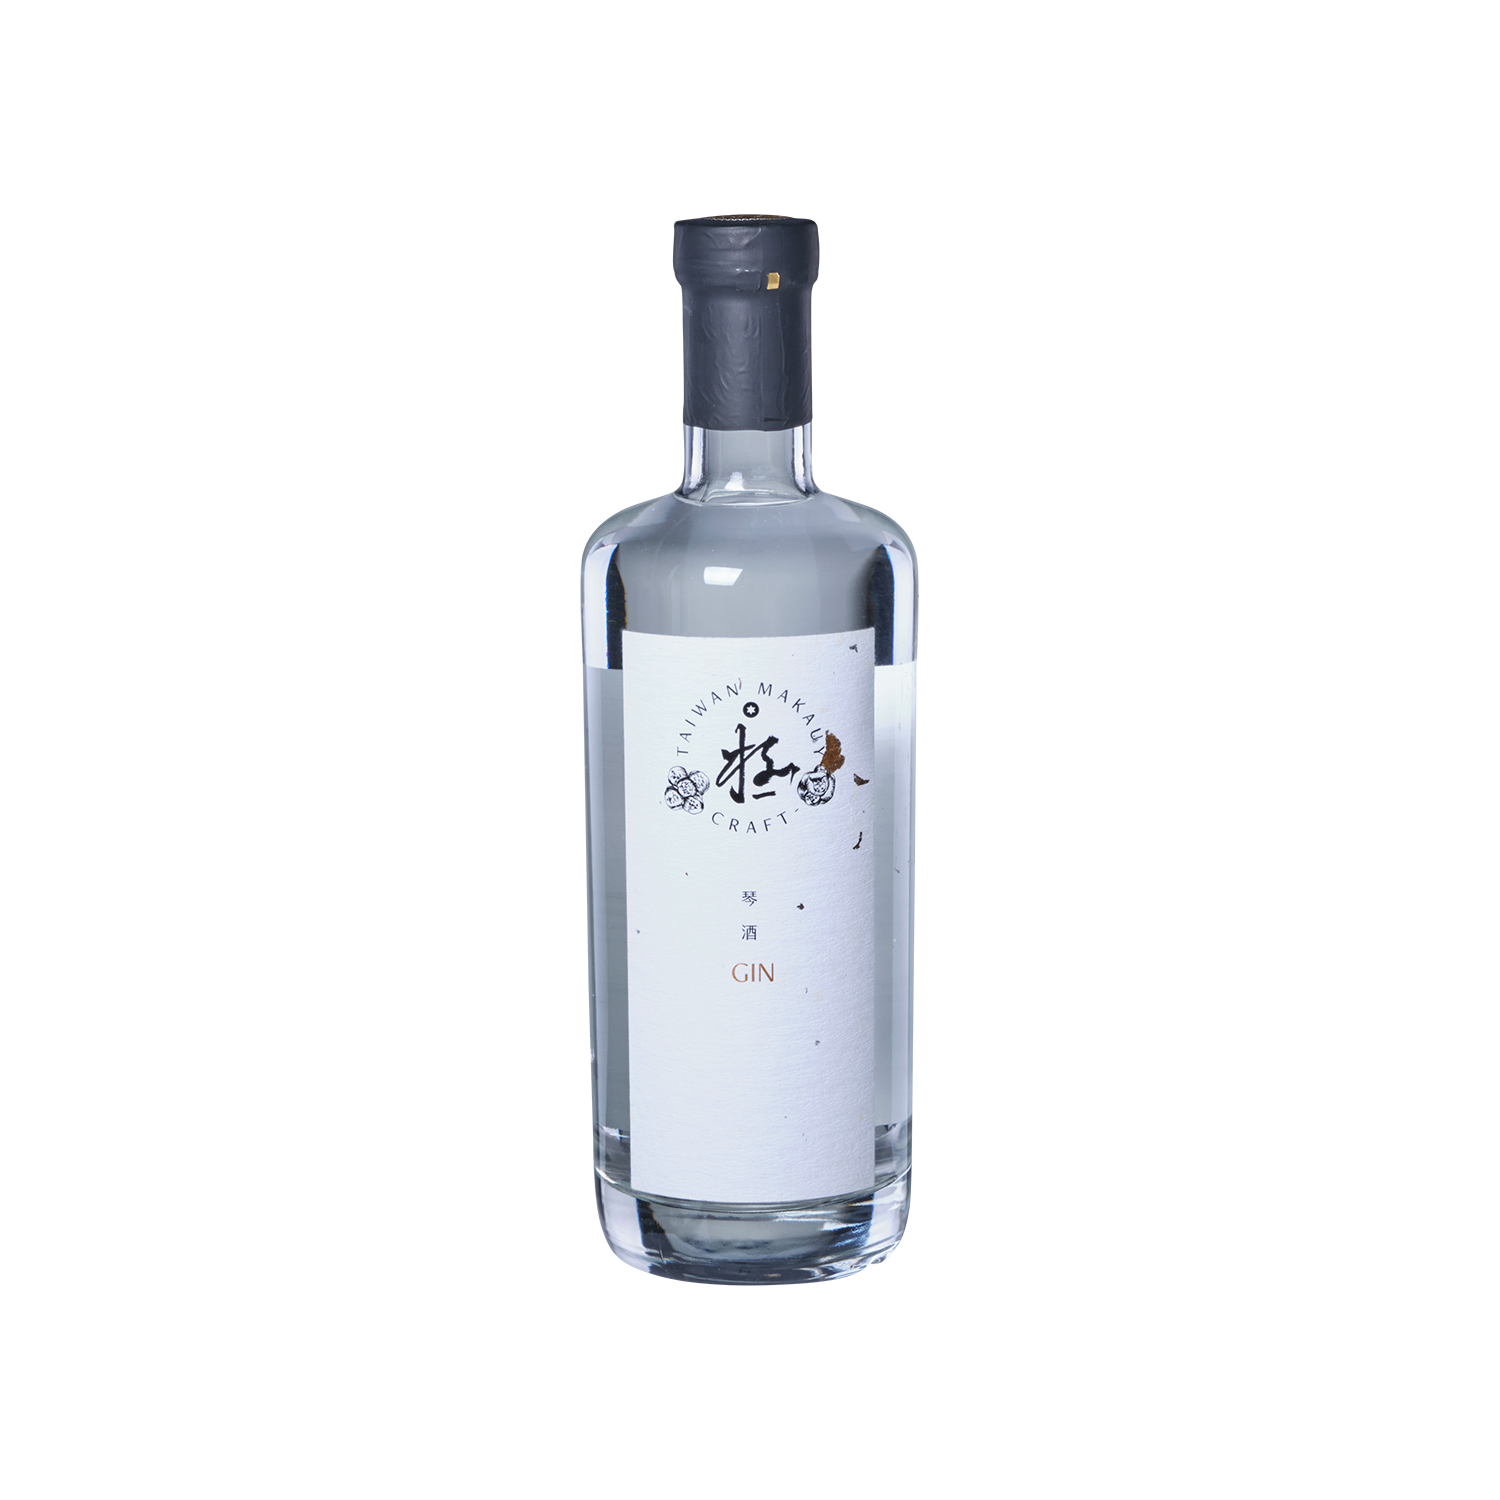 Taiwan Makauy Superb Craft -Gin - Grand Gold Quality Award 2023 from ...